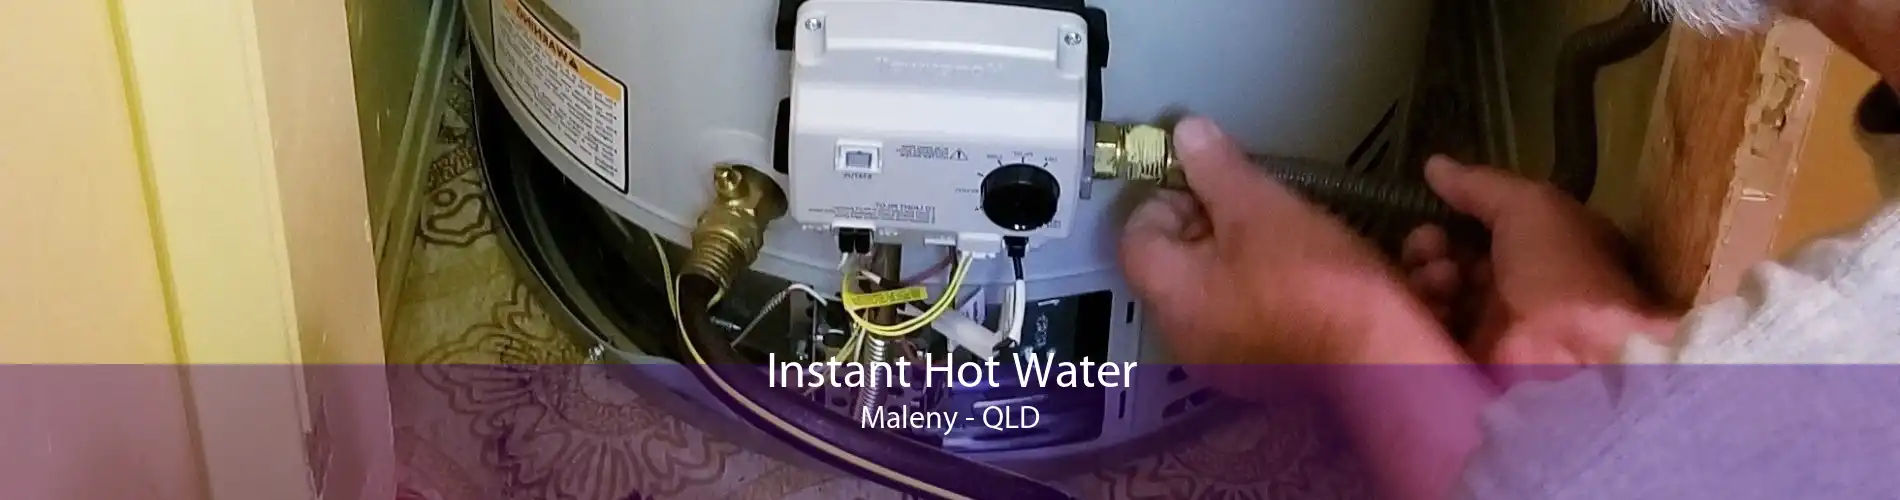 Instant Hot Water Maleny - QLD